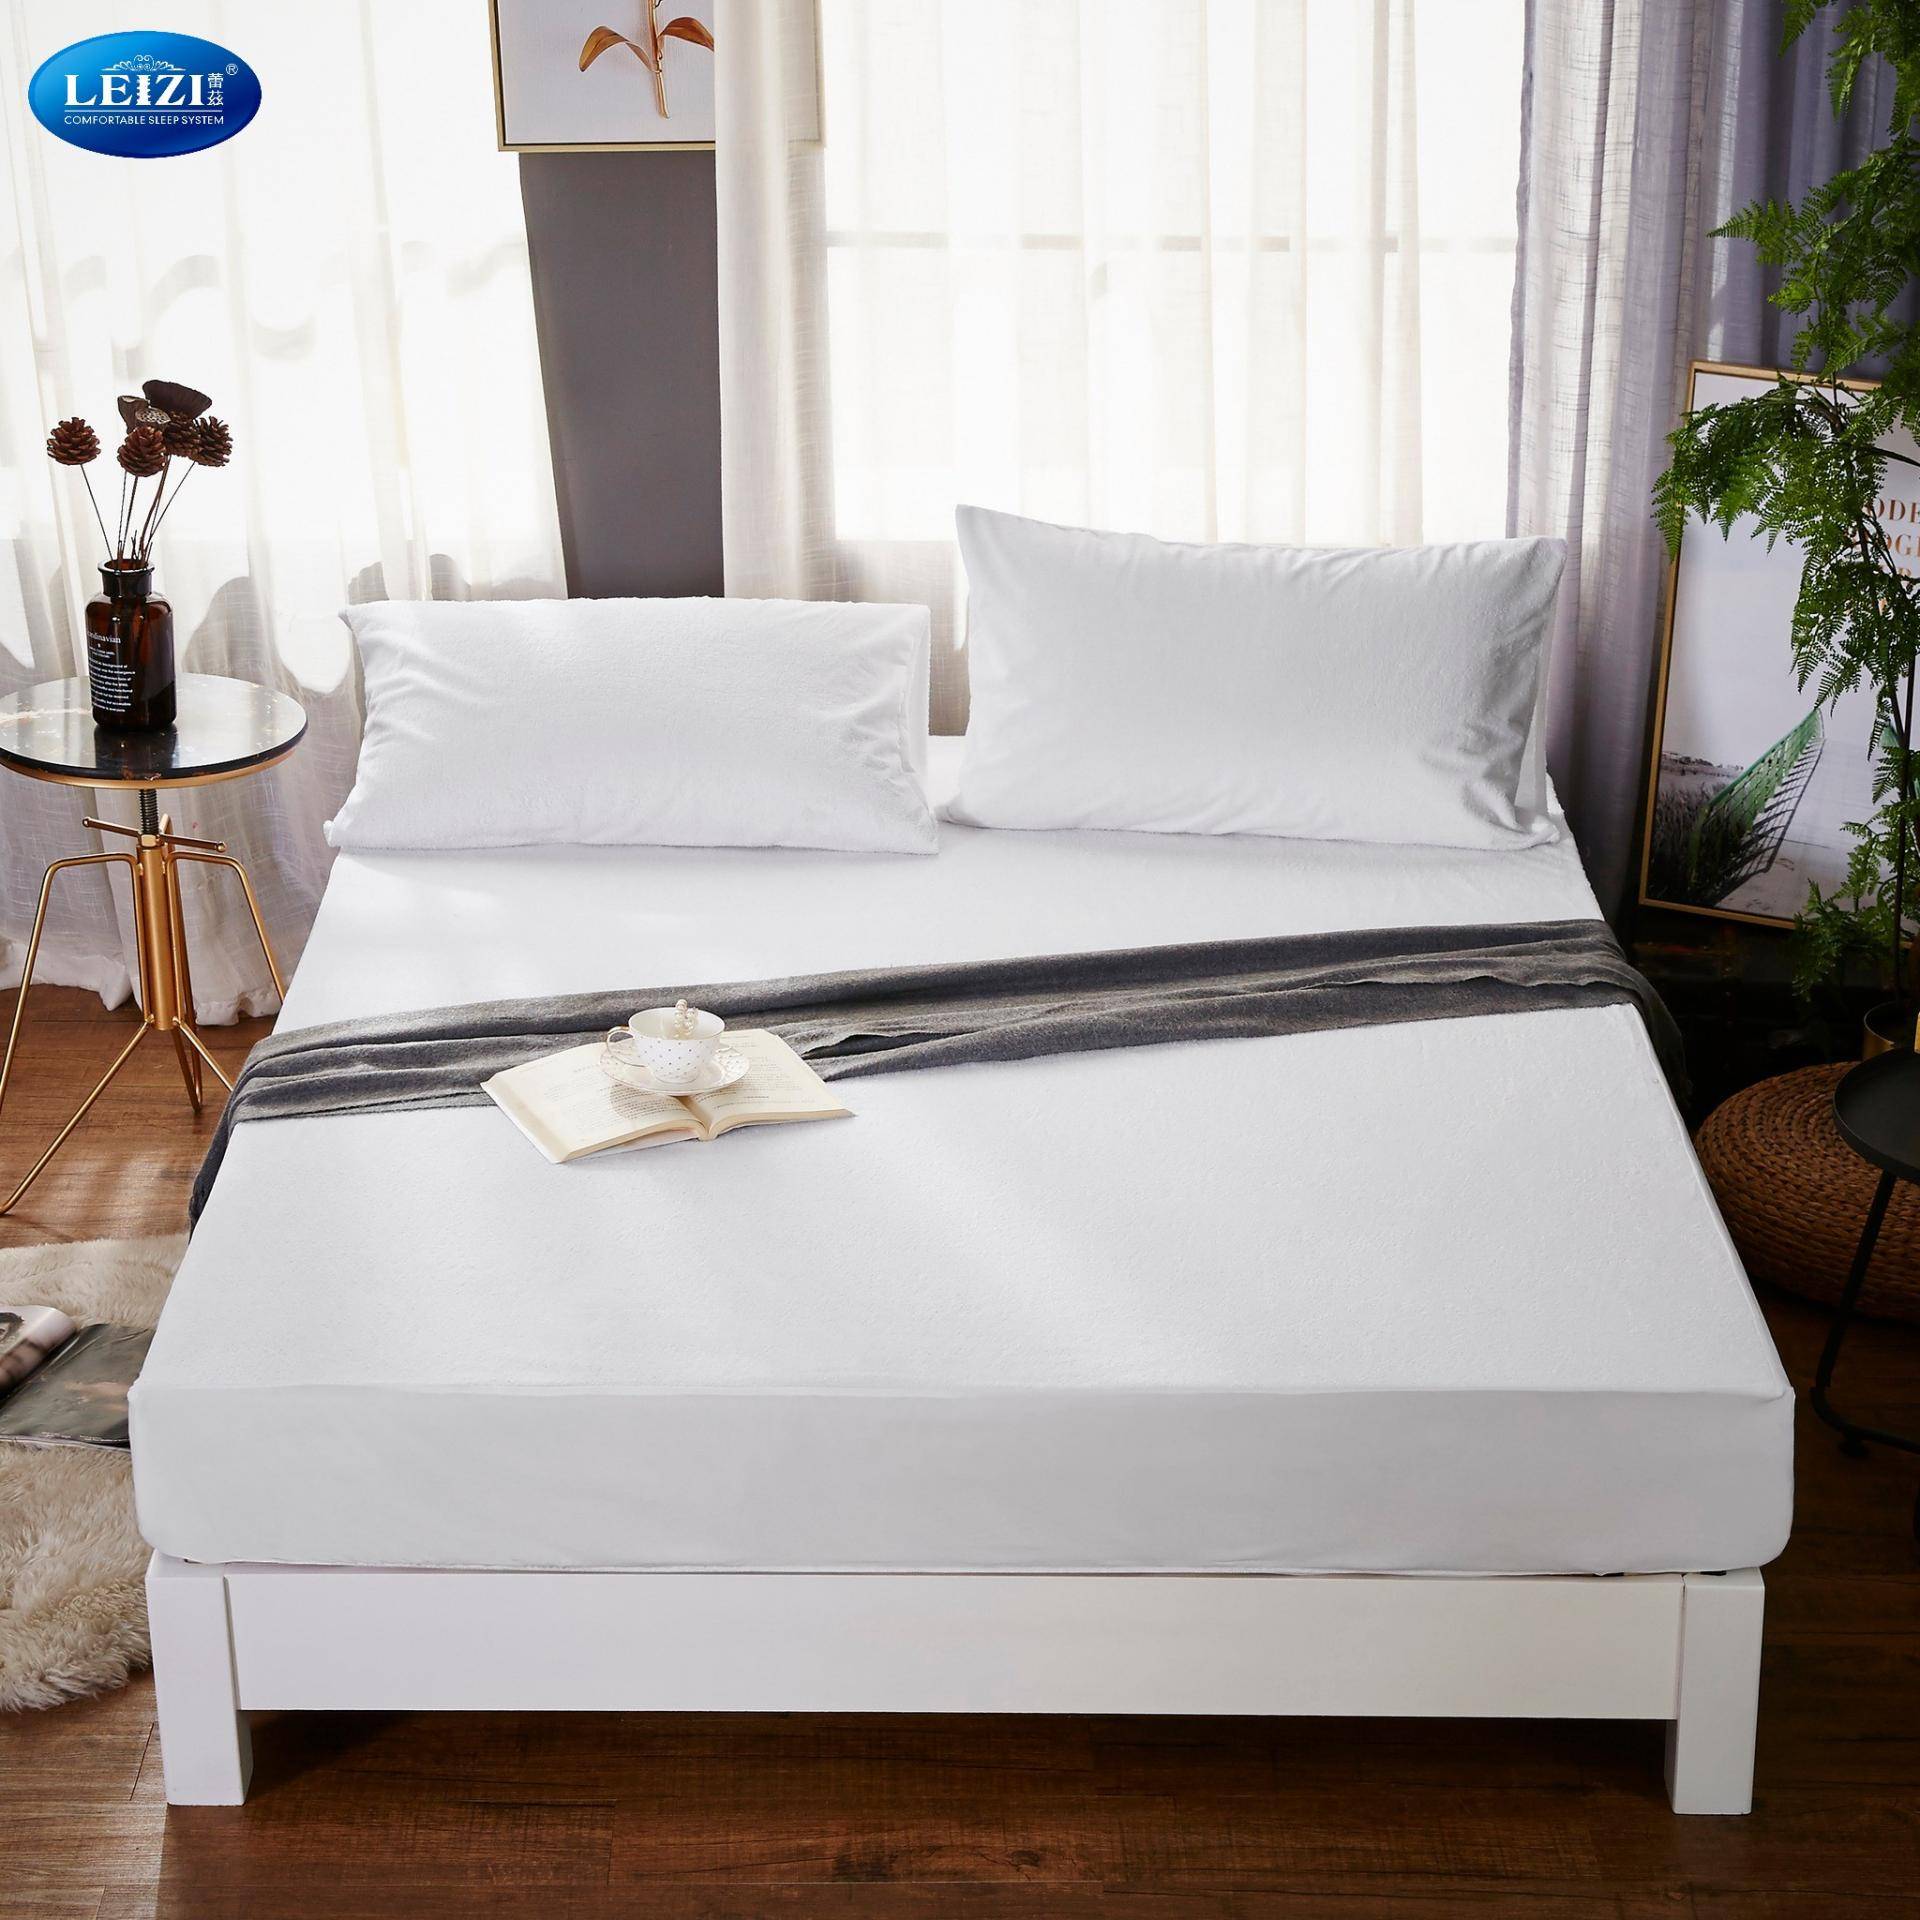 How Often Do Mattress Protectors Be Washed?